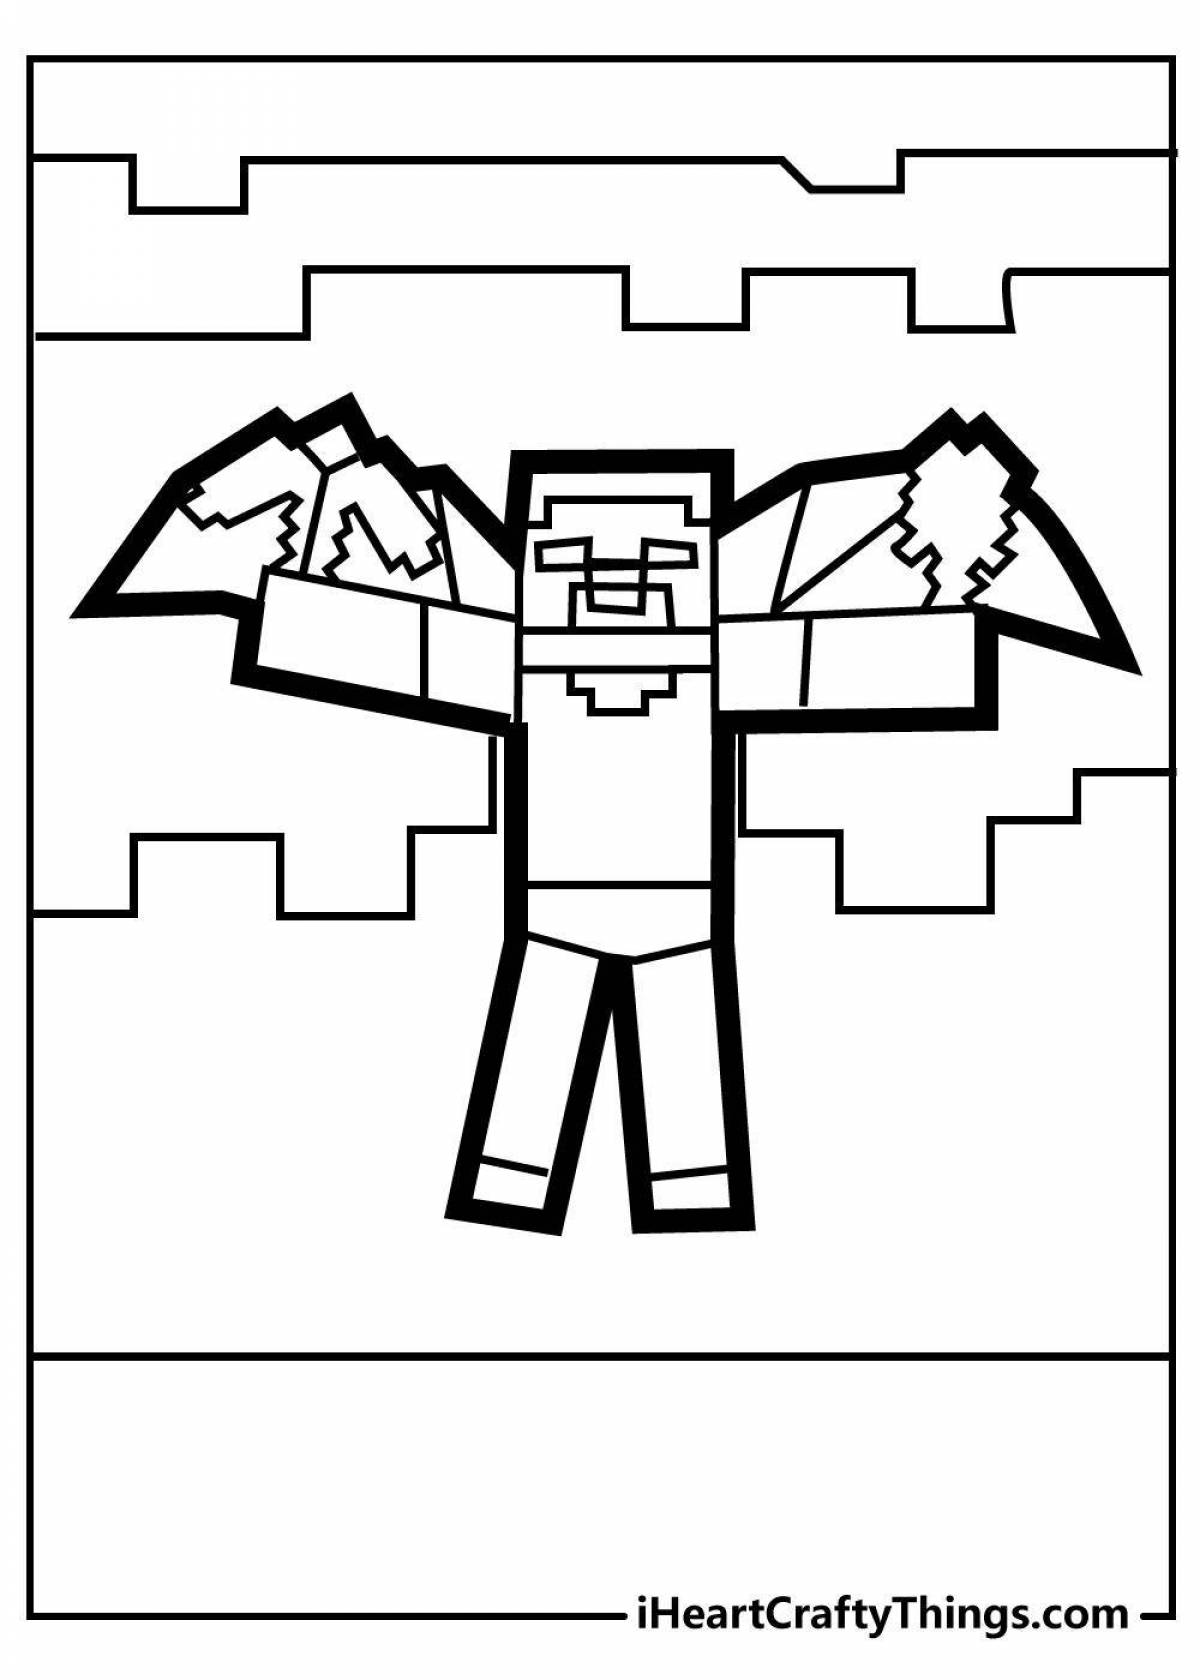 Awesome minecraft dungeon coloring page